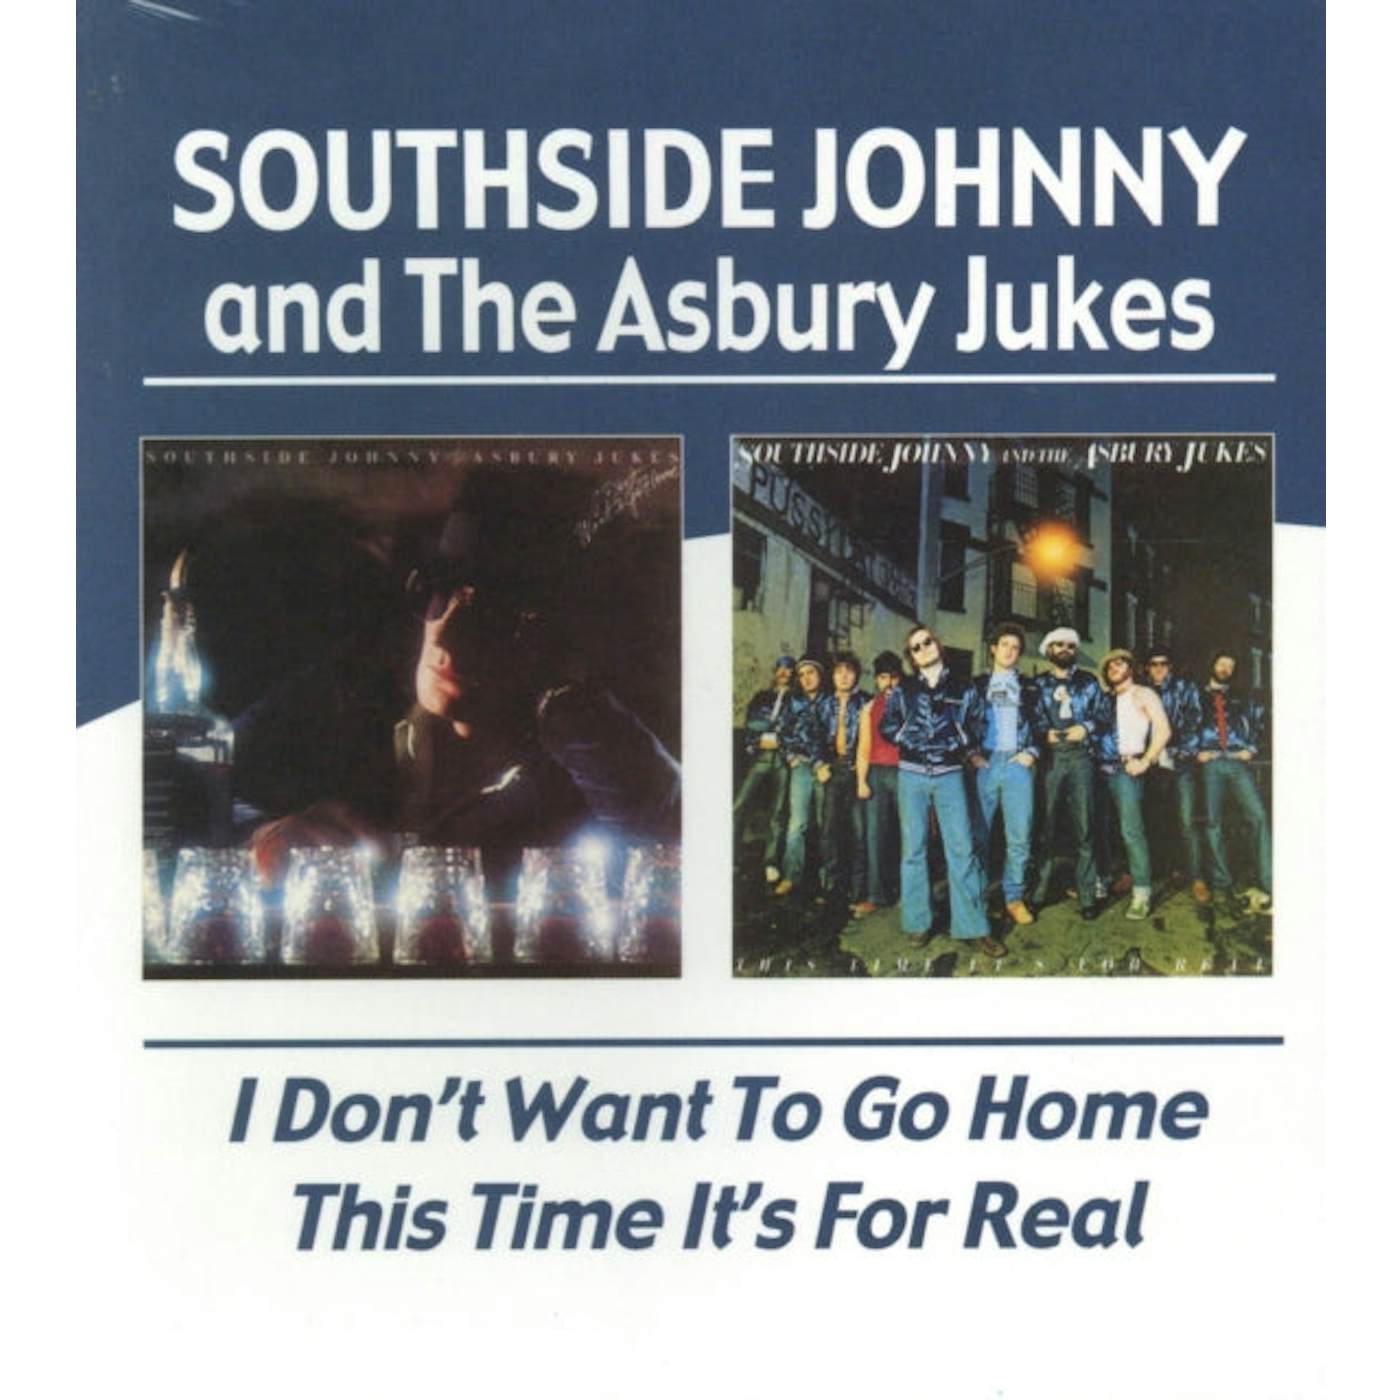 Southside Johnny And The Asbury JukesCD - I Don't Want To Go Home / This Time It's For Real